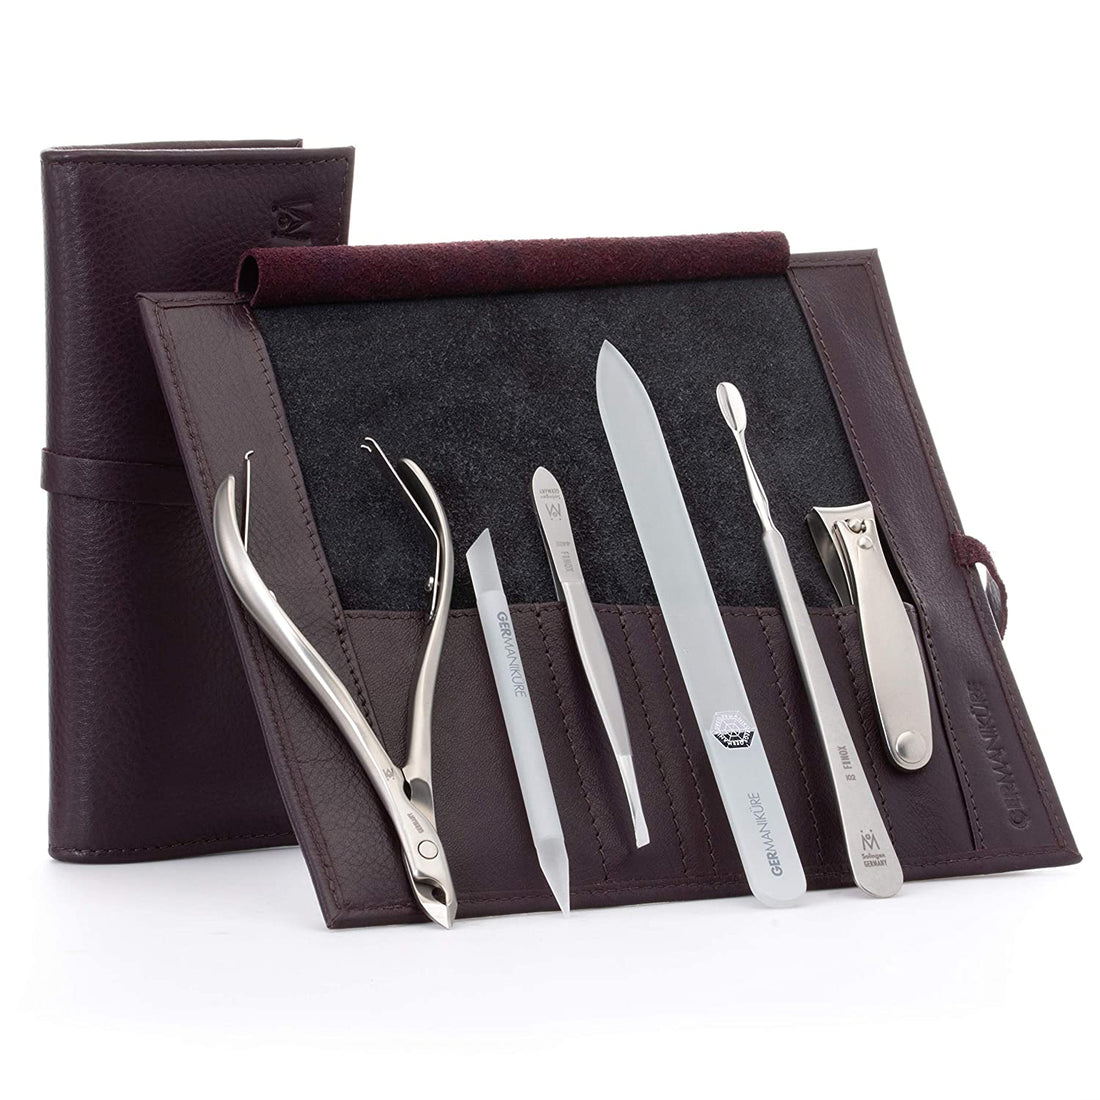 6pc Manicure Set in Leather Roll